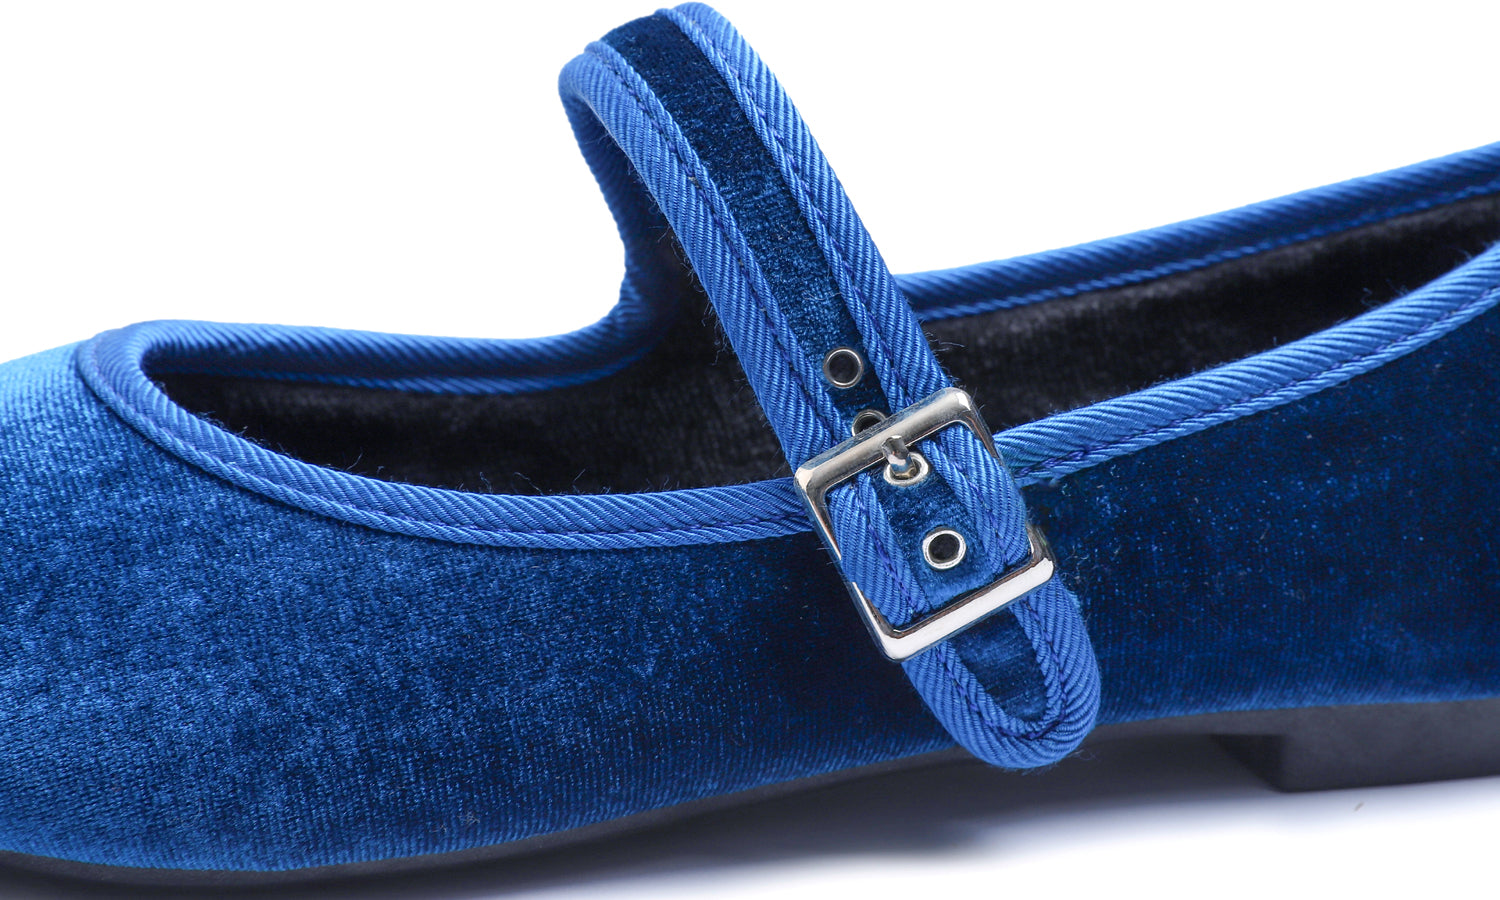 Feversole Women's Soft Cushion Extra Padded Comfort Round Toe Mary Jane Metal Buckle Fashion Ballet Flats Walking Shoes Peacock Blue Velvet